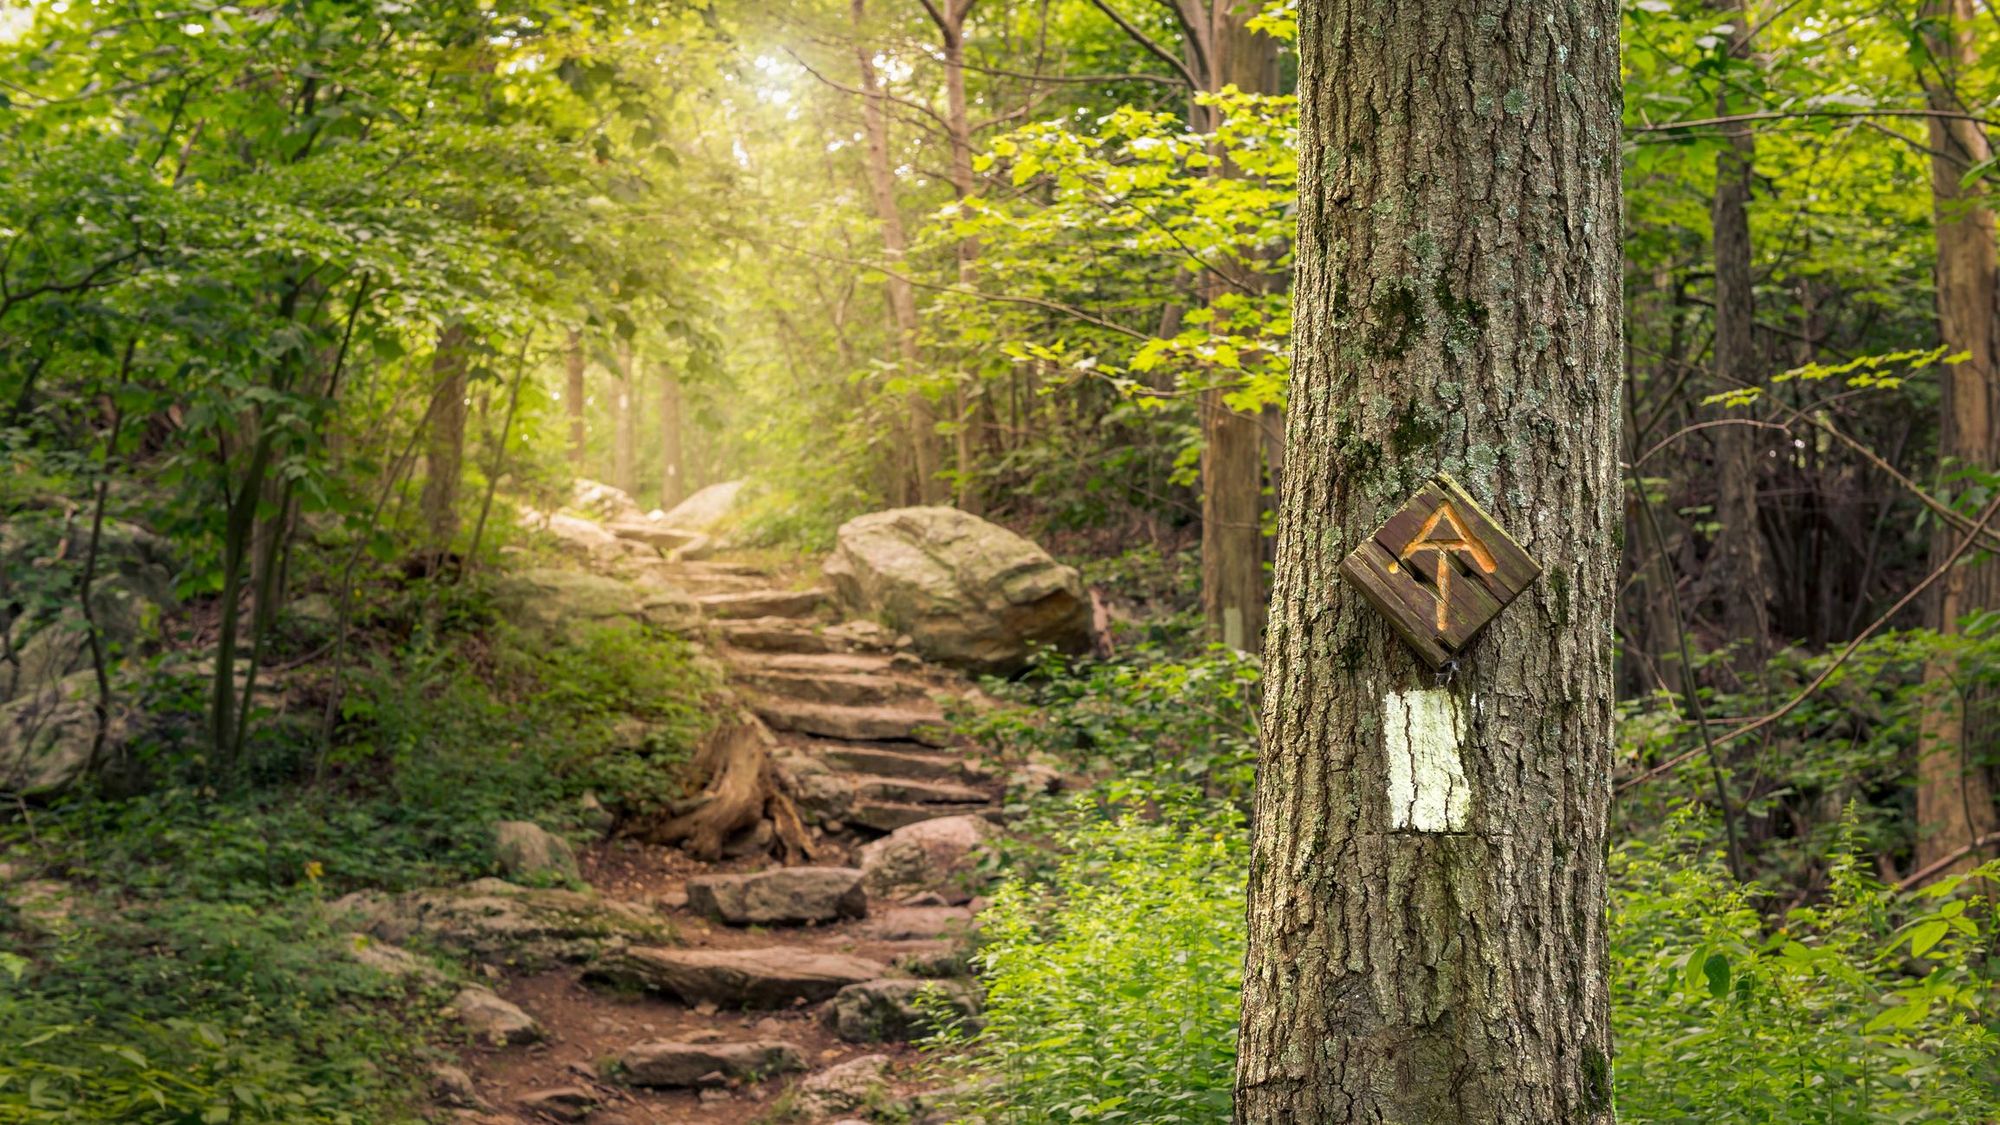 The Appalachian Trail through Stokes State Forest New Jersey. Photo: Getty.